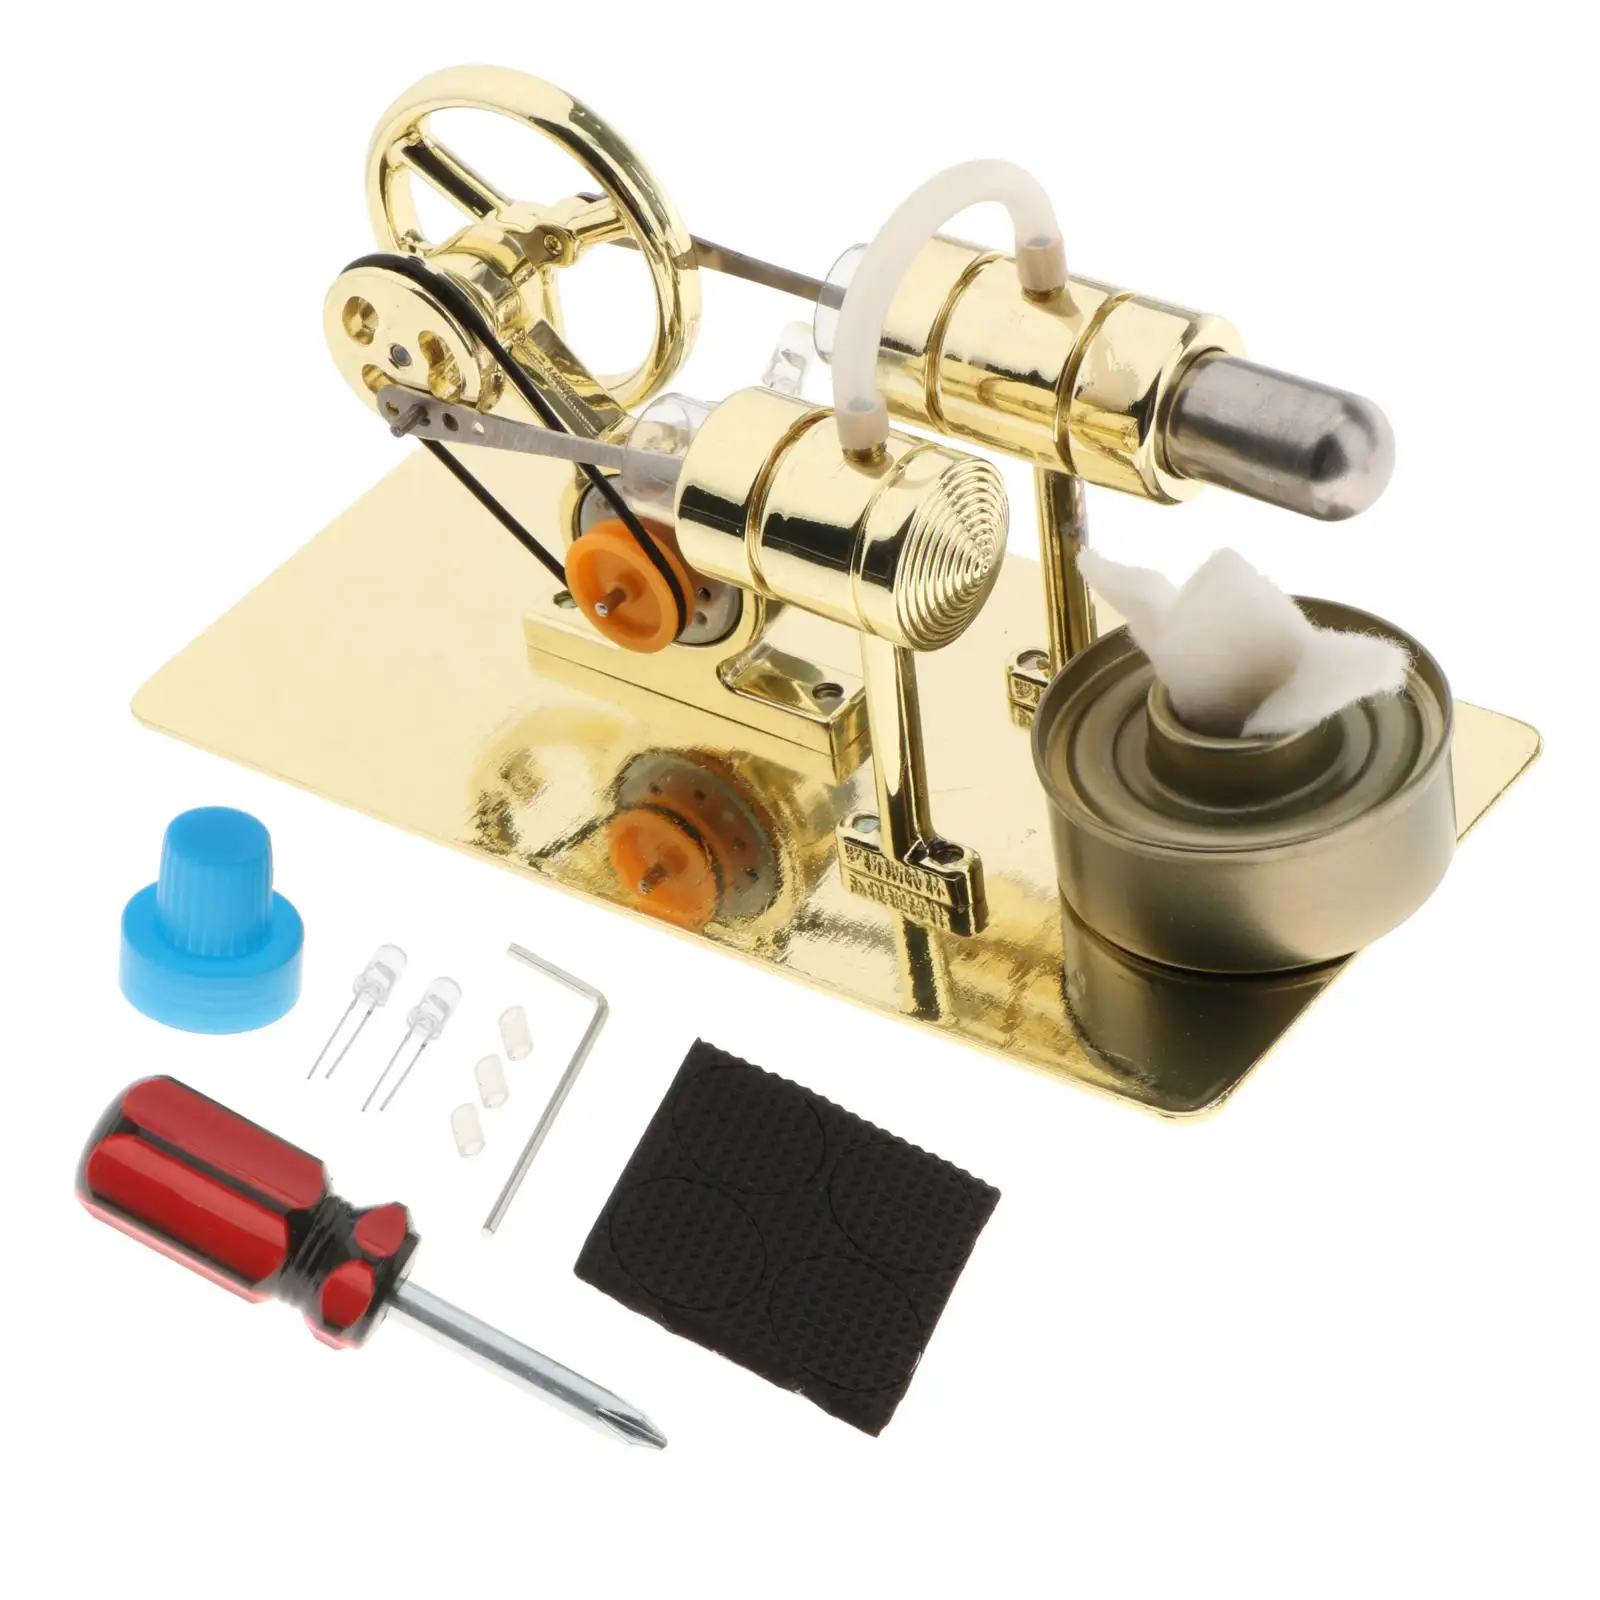 Hot Air Stirling Engine Motor Model Educational Toy Electricity Scientific Toys